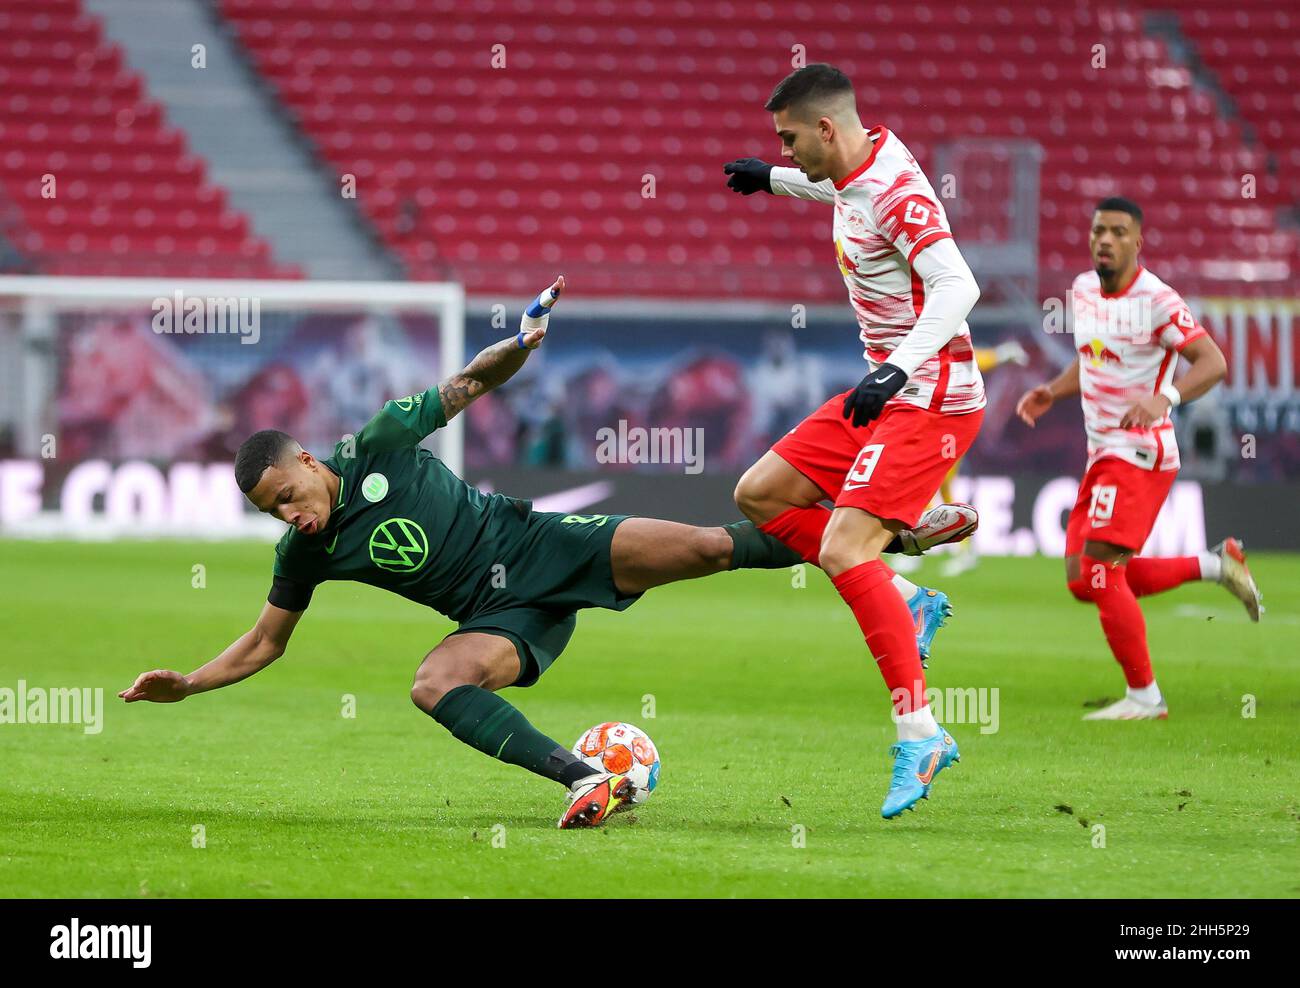 23 January 2022, Saxony, Leipzig: Soccer: Bundesliga, Matchday 20, RB Leipzig - VfL Wolfsburg, at the Red Bull Arena. Leipzig's Andre Silva (r) and Wolfsburg's Aster Vranckx in a duel. Photo: Jan Woitas/dpa-Zentralbild/dpa - IMPORTANT NOTE: In accordance with the requirements of the DFL Deutsche Fußball Liga and the DFB Deutscher Fußball-Bund, it is prohibited to use or have used photographs taken in the stadium and/or of the match in the form of sequence pictures and/or video-like photo series. Stock Photo